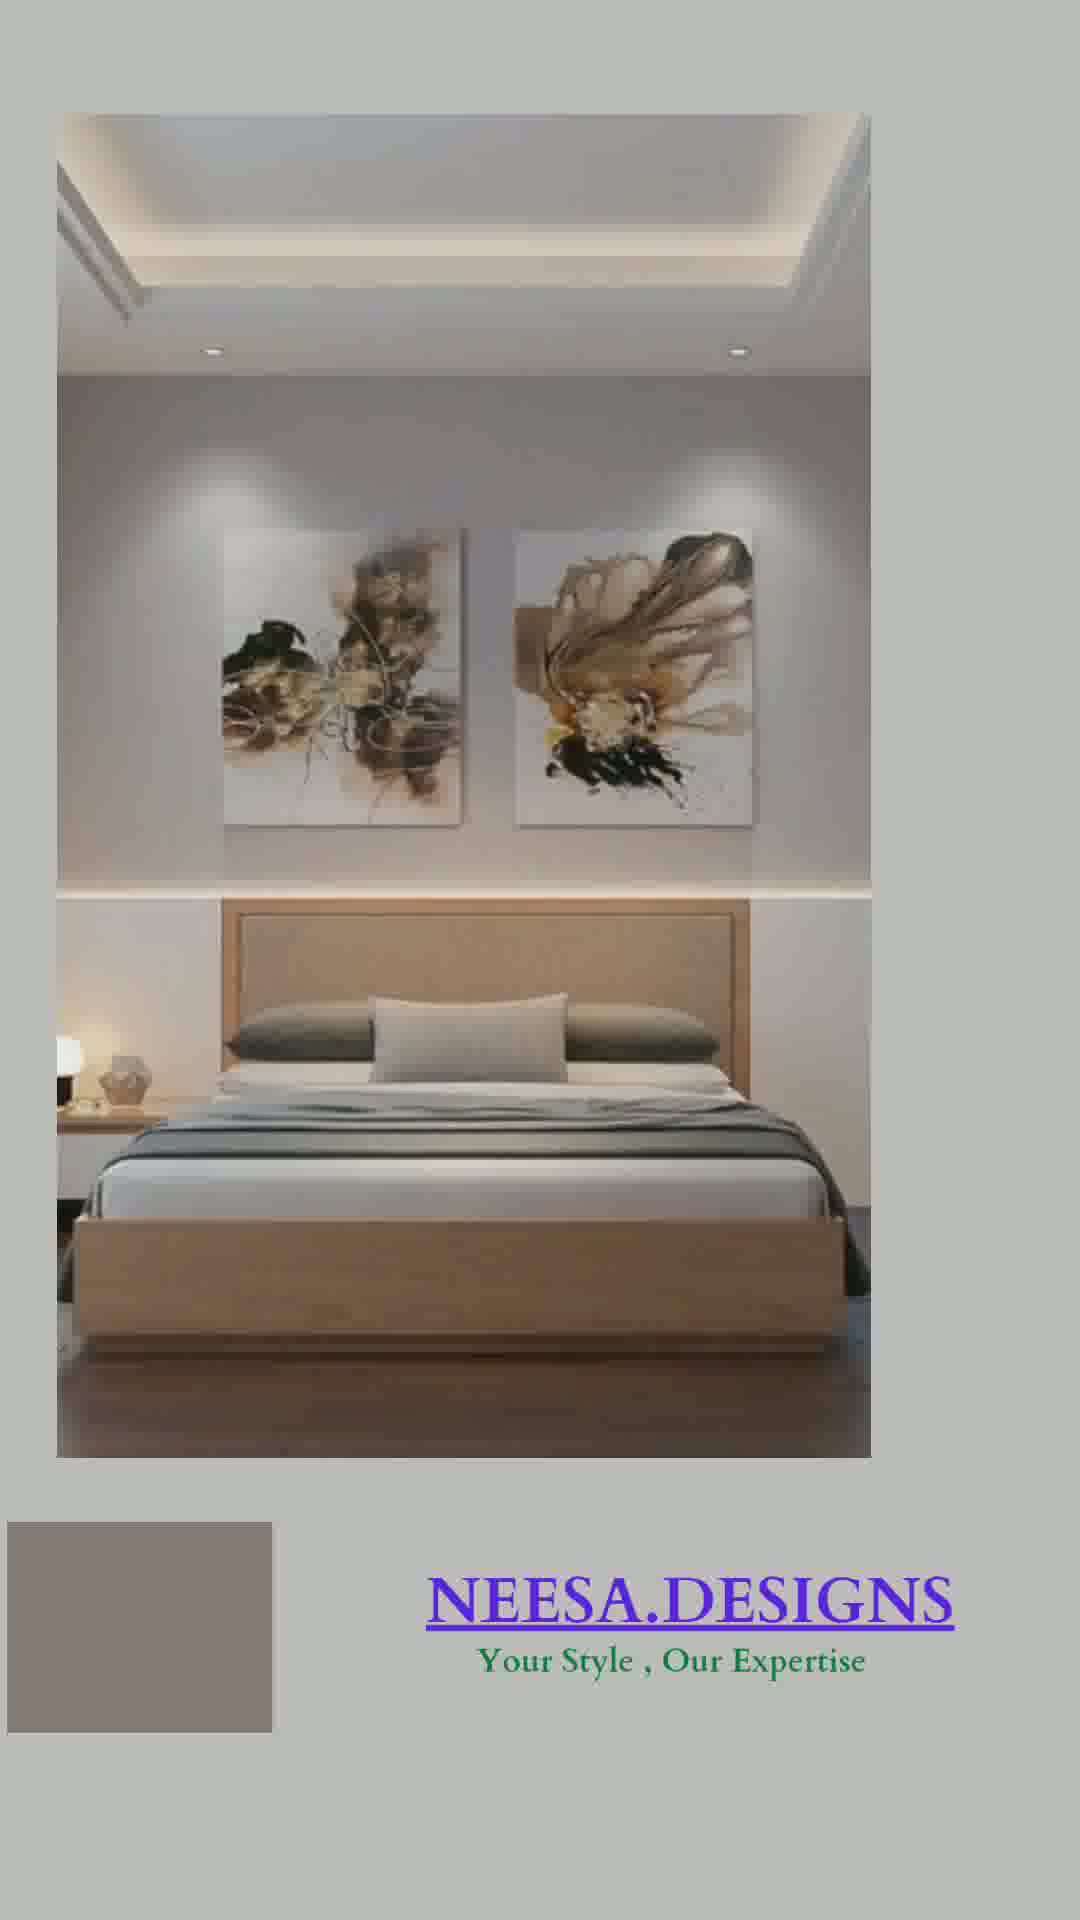 Comfortable and Sofisticated Bedrooms

Get in Touch at -
8178726660